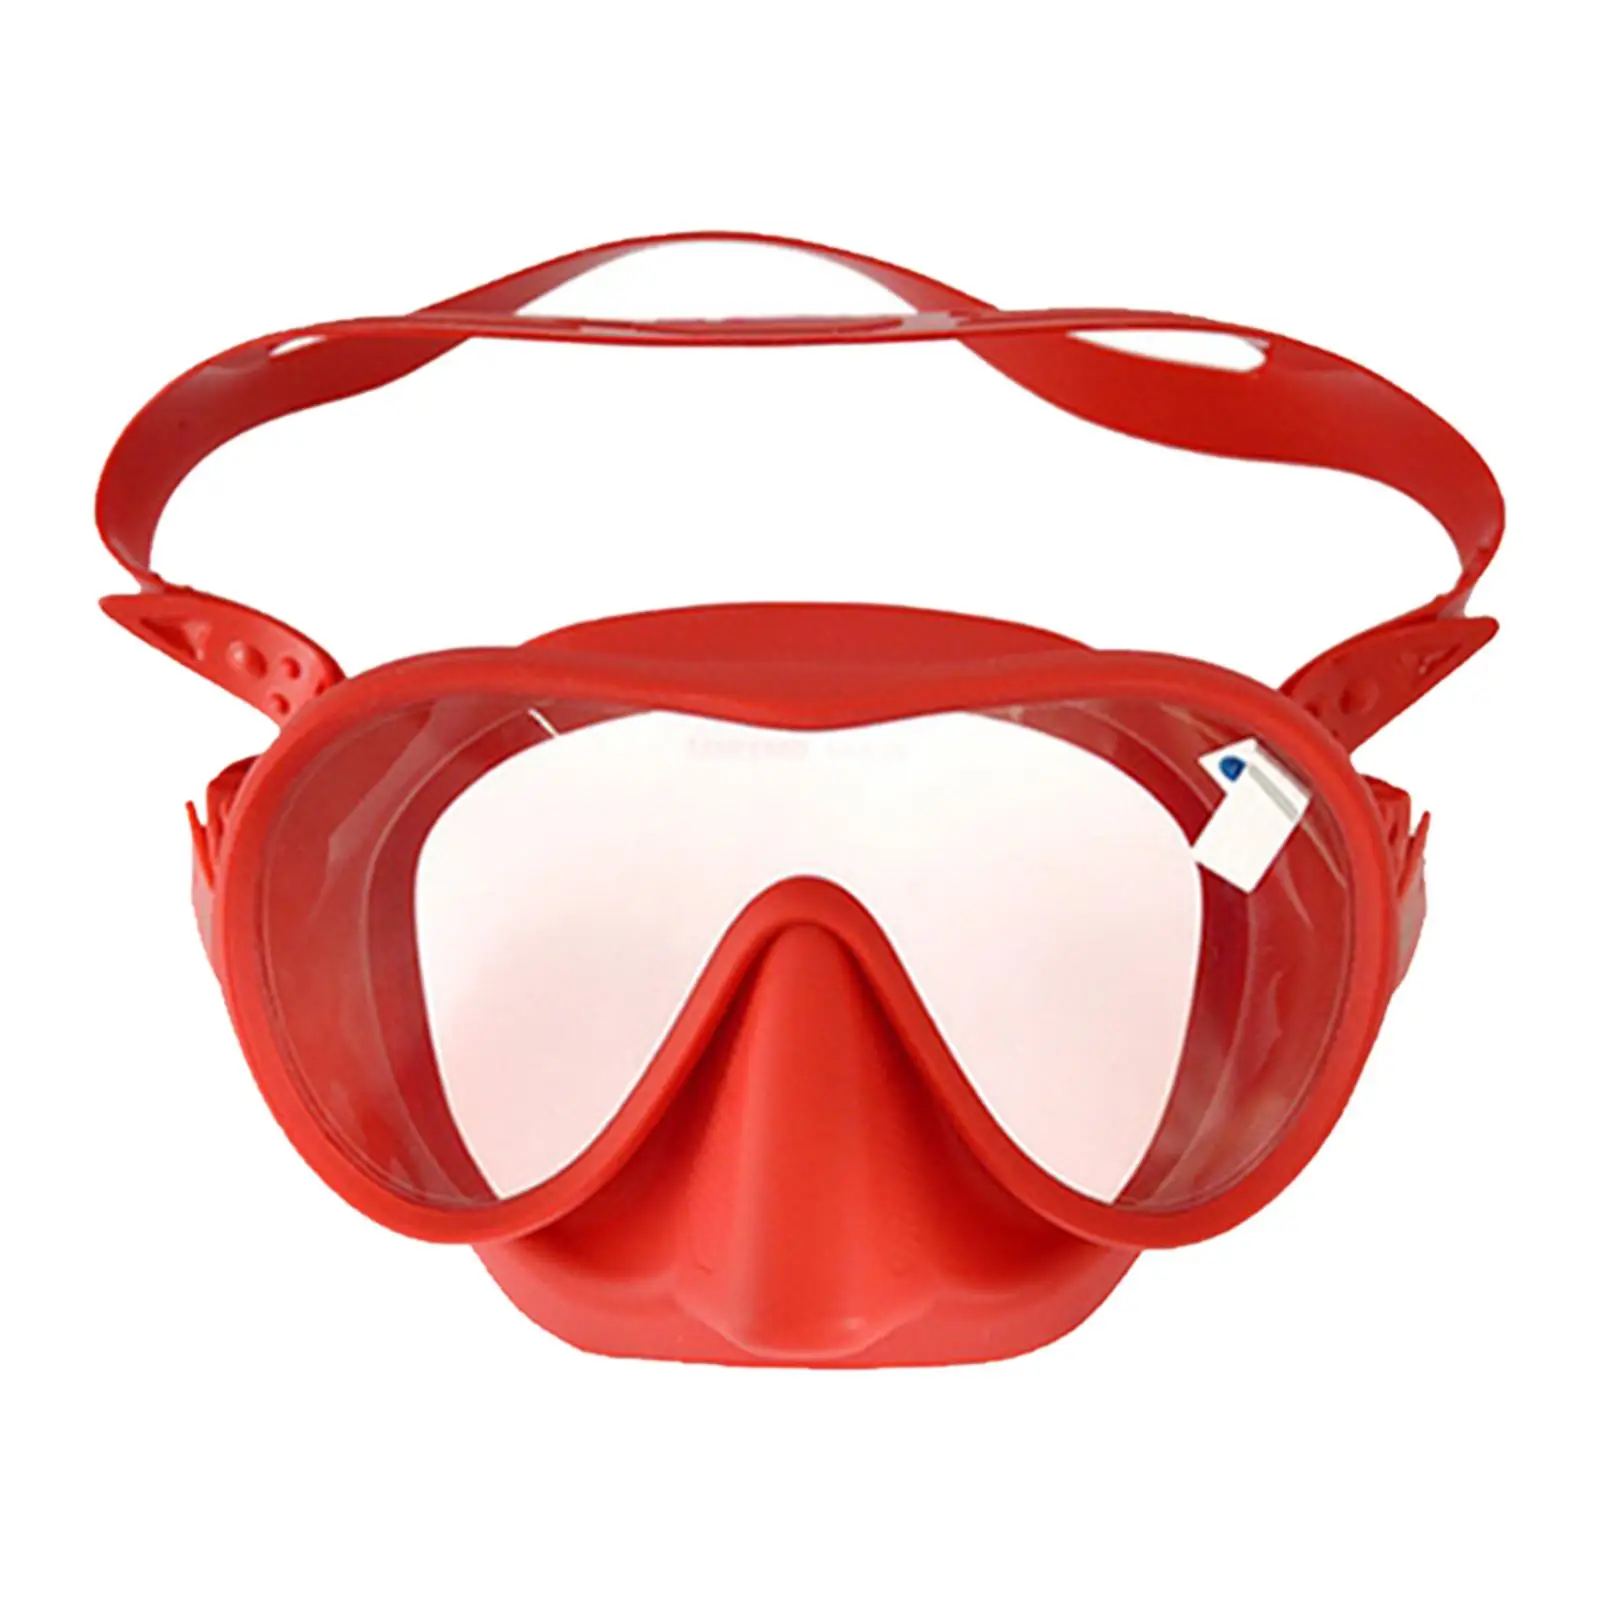 Swim Snorkel Goggles Anti Fog Adjustable Headband Scuba Diver Accesscories Snorkeling Full Face Diving Mask for Youth Outdoor